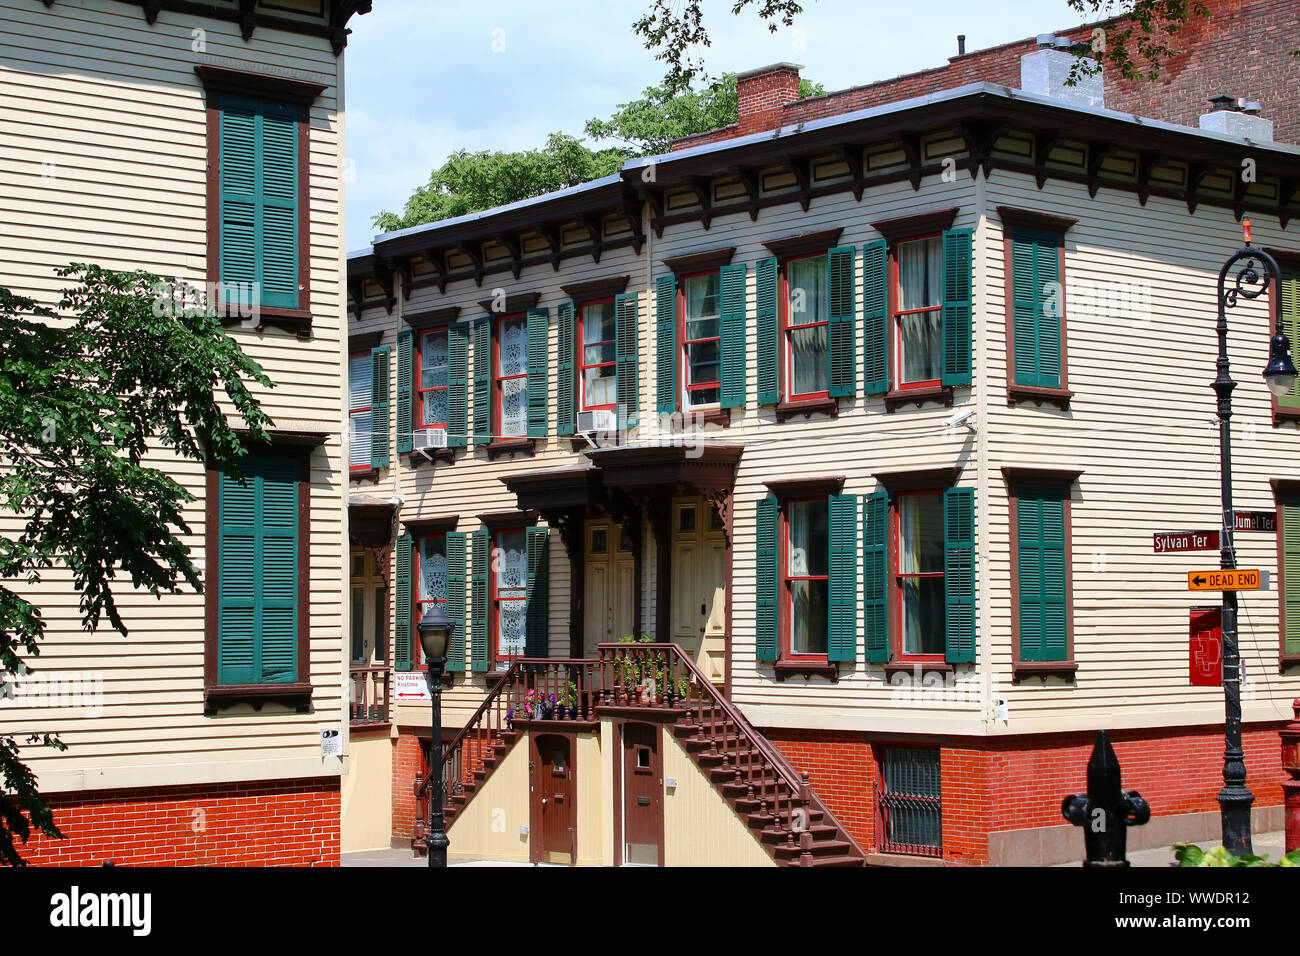 Sylvan Terrace wooden frame houses were built in 1882-1883 and are part of Jumel Terrace Historic District in Washington Heights, Manhattan on August Stock Photo